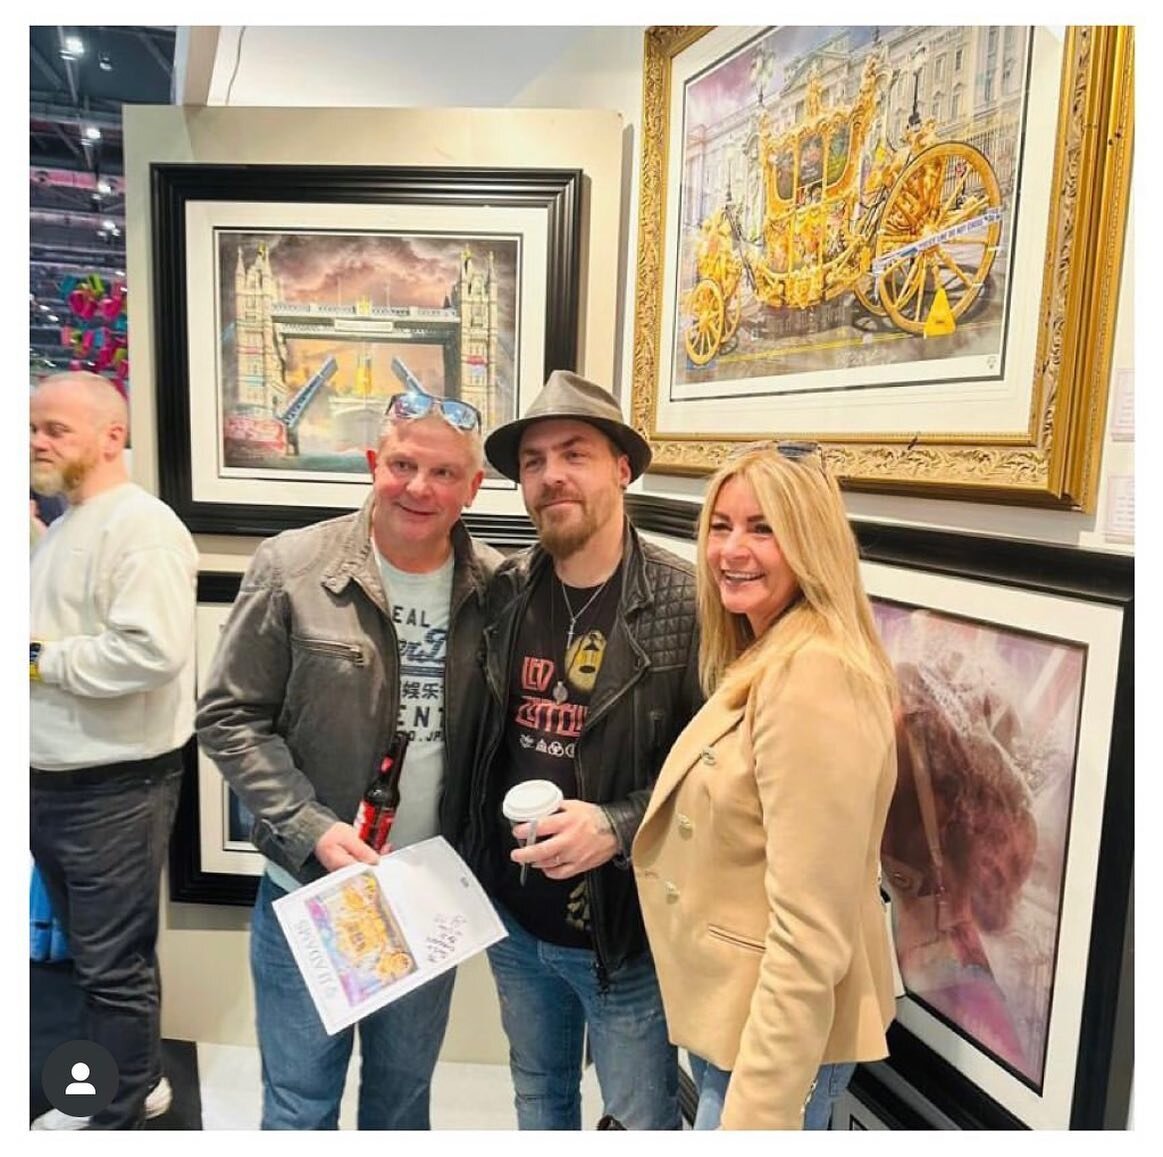 Huge thanks to everyone who came to @generationgalleryofficial at Grand Designs Live in London on Saturday, was great seeing you, big thanks to the gallery as well 🙌🏼 #art #artist #artwork #popart #exhibition #limitededition #designer #artexhibitio